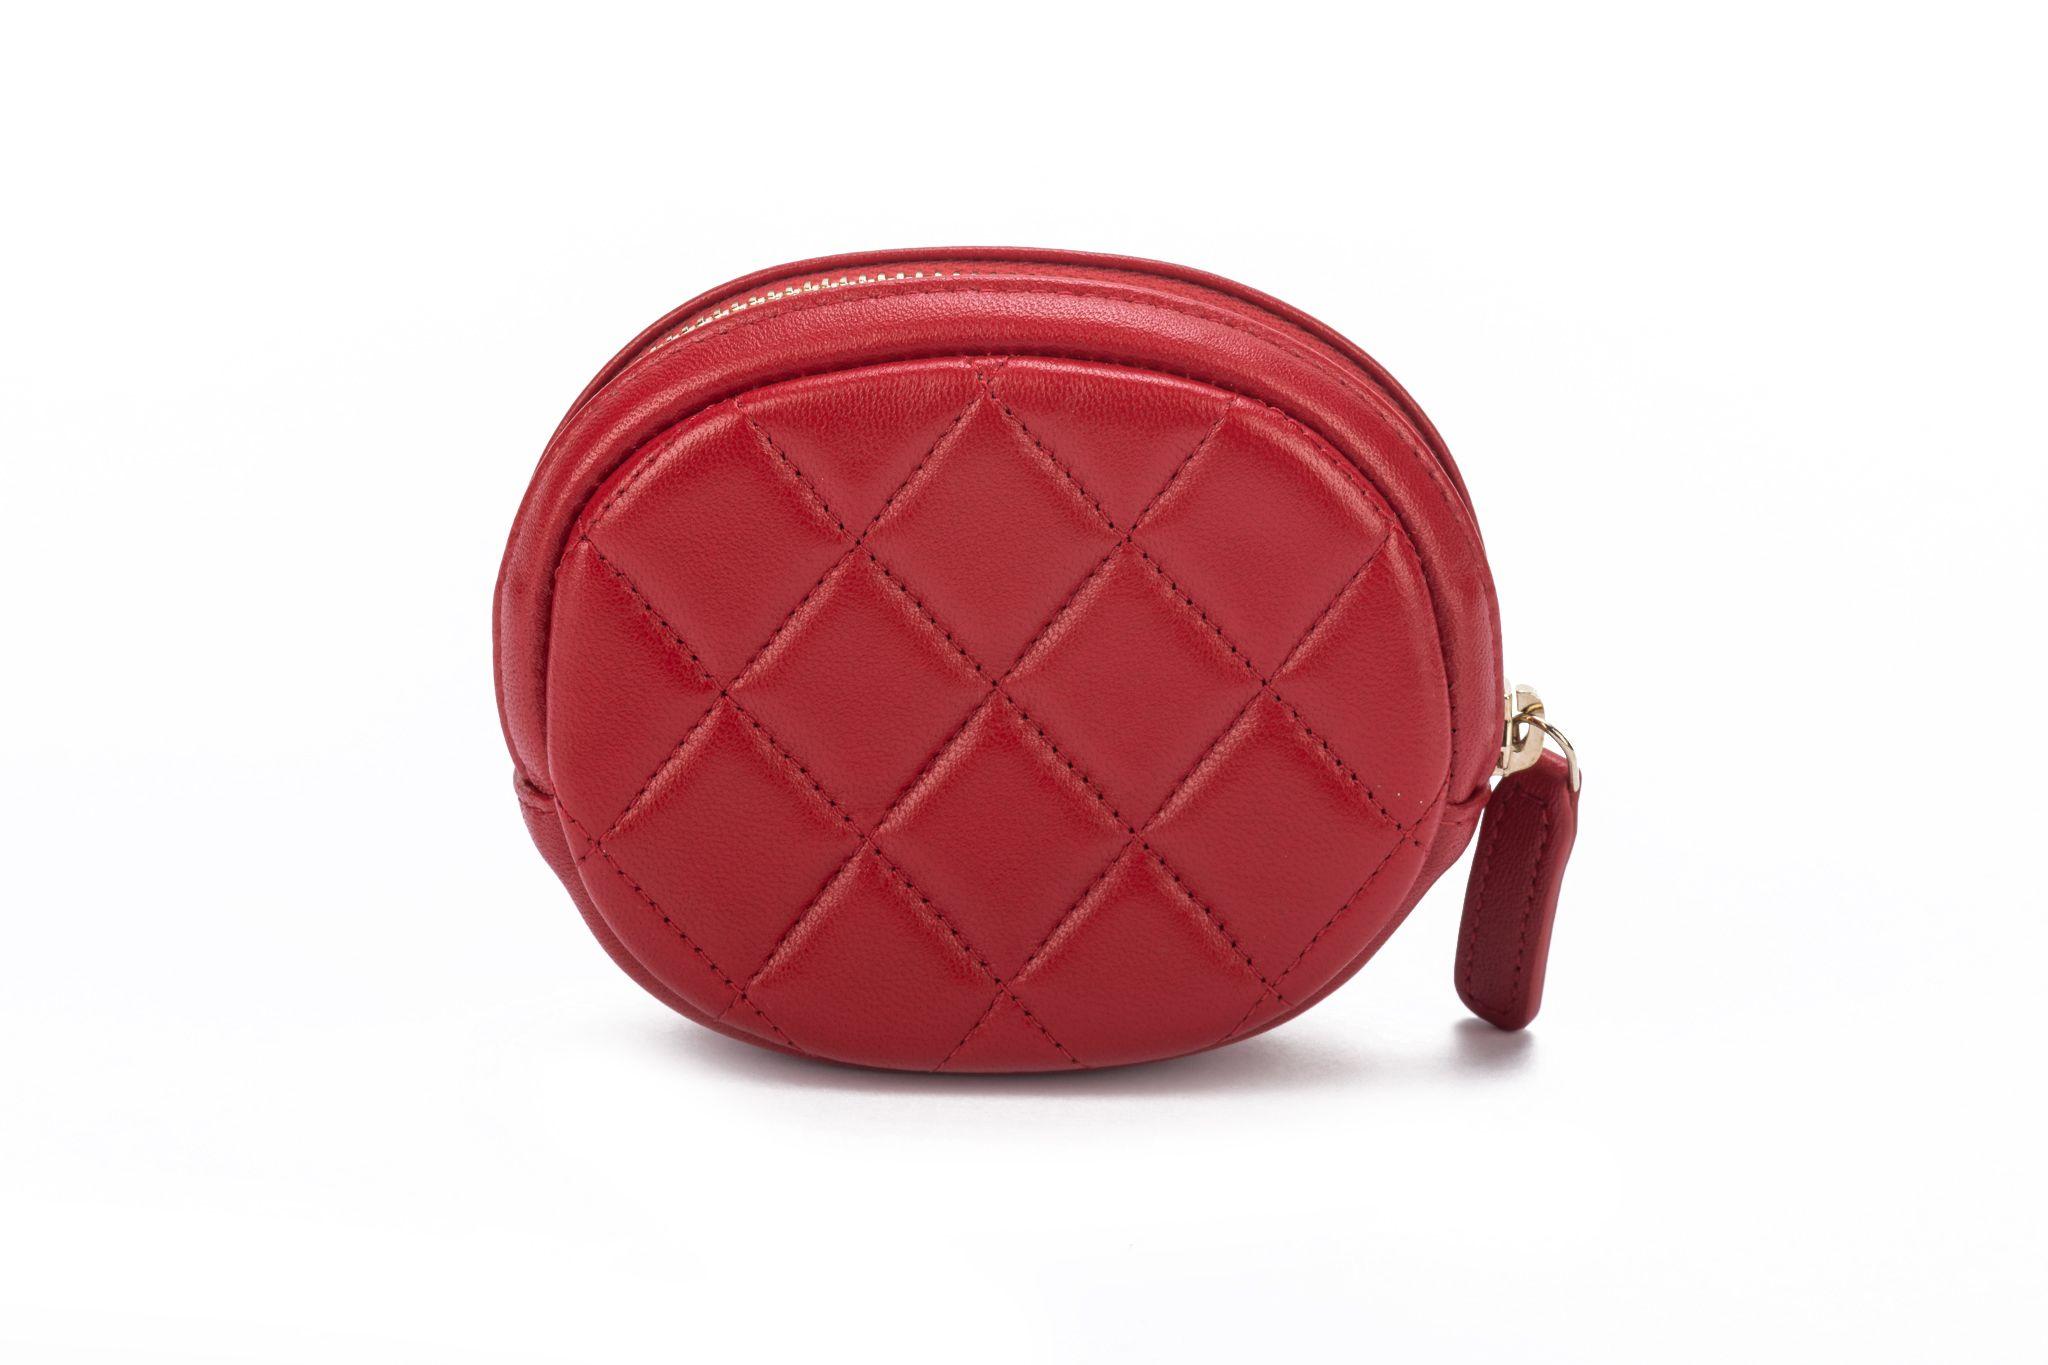 Chanel new in box oval red quilted caviar coin case with champagne gold logo. Collection 29. Comes with hologram, ID card, booklet, dust cover and box.